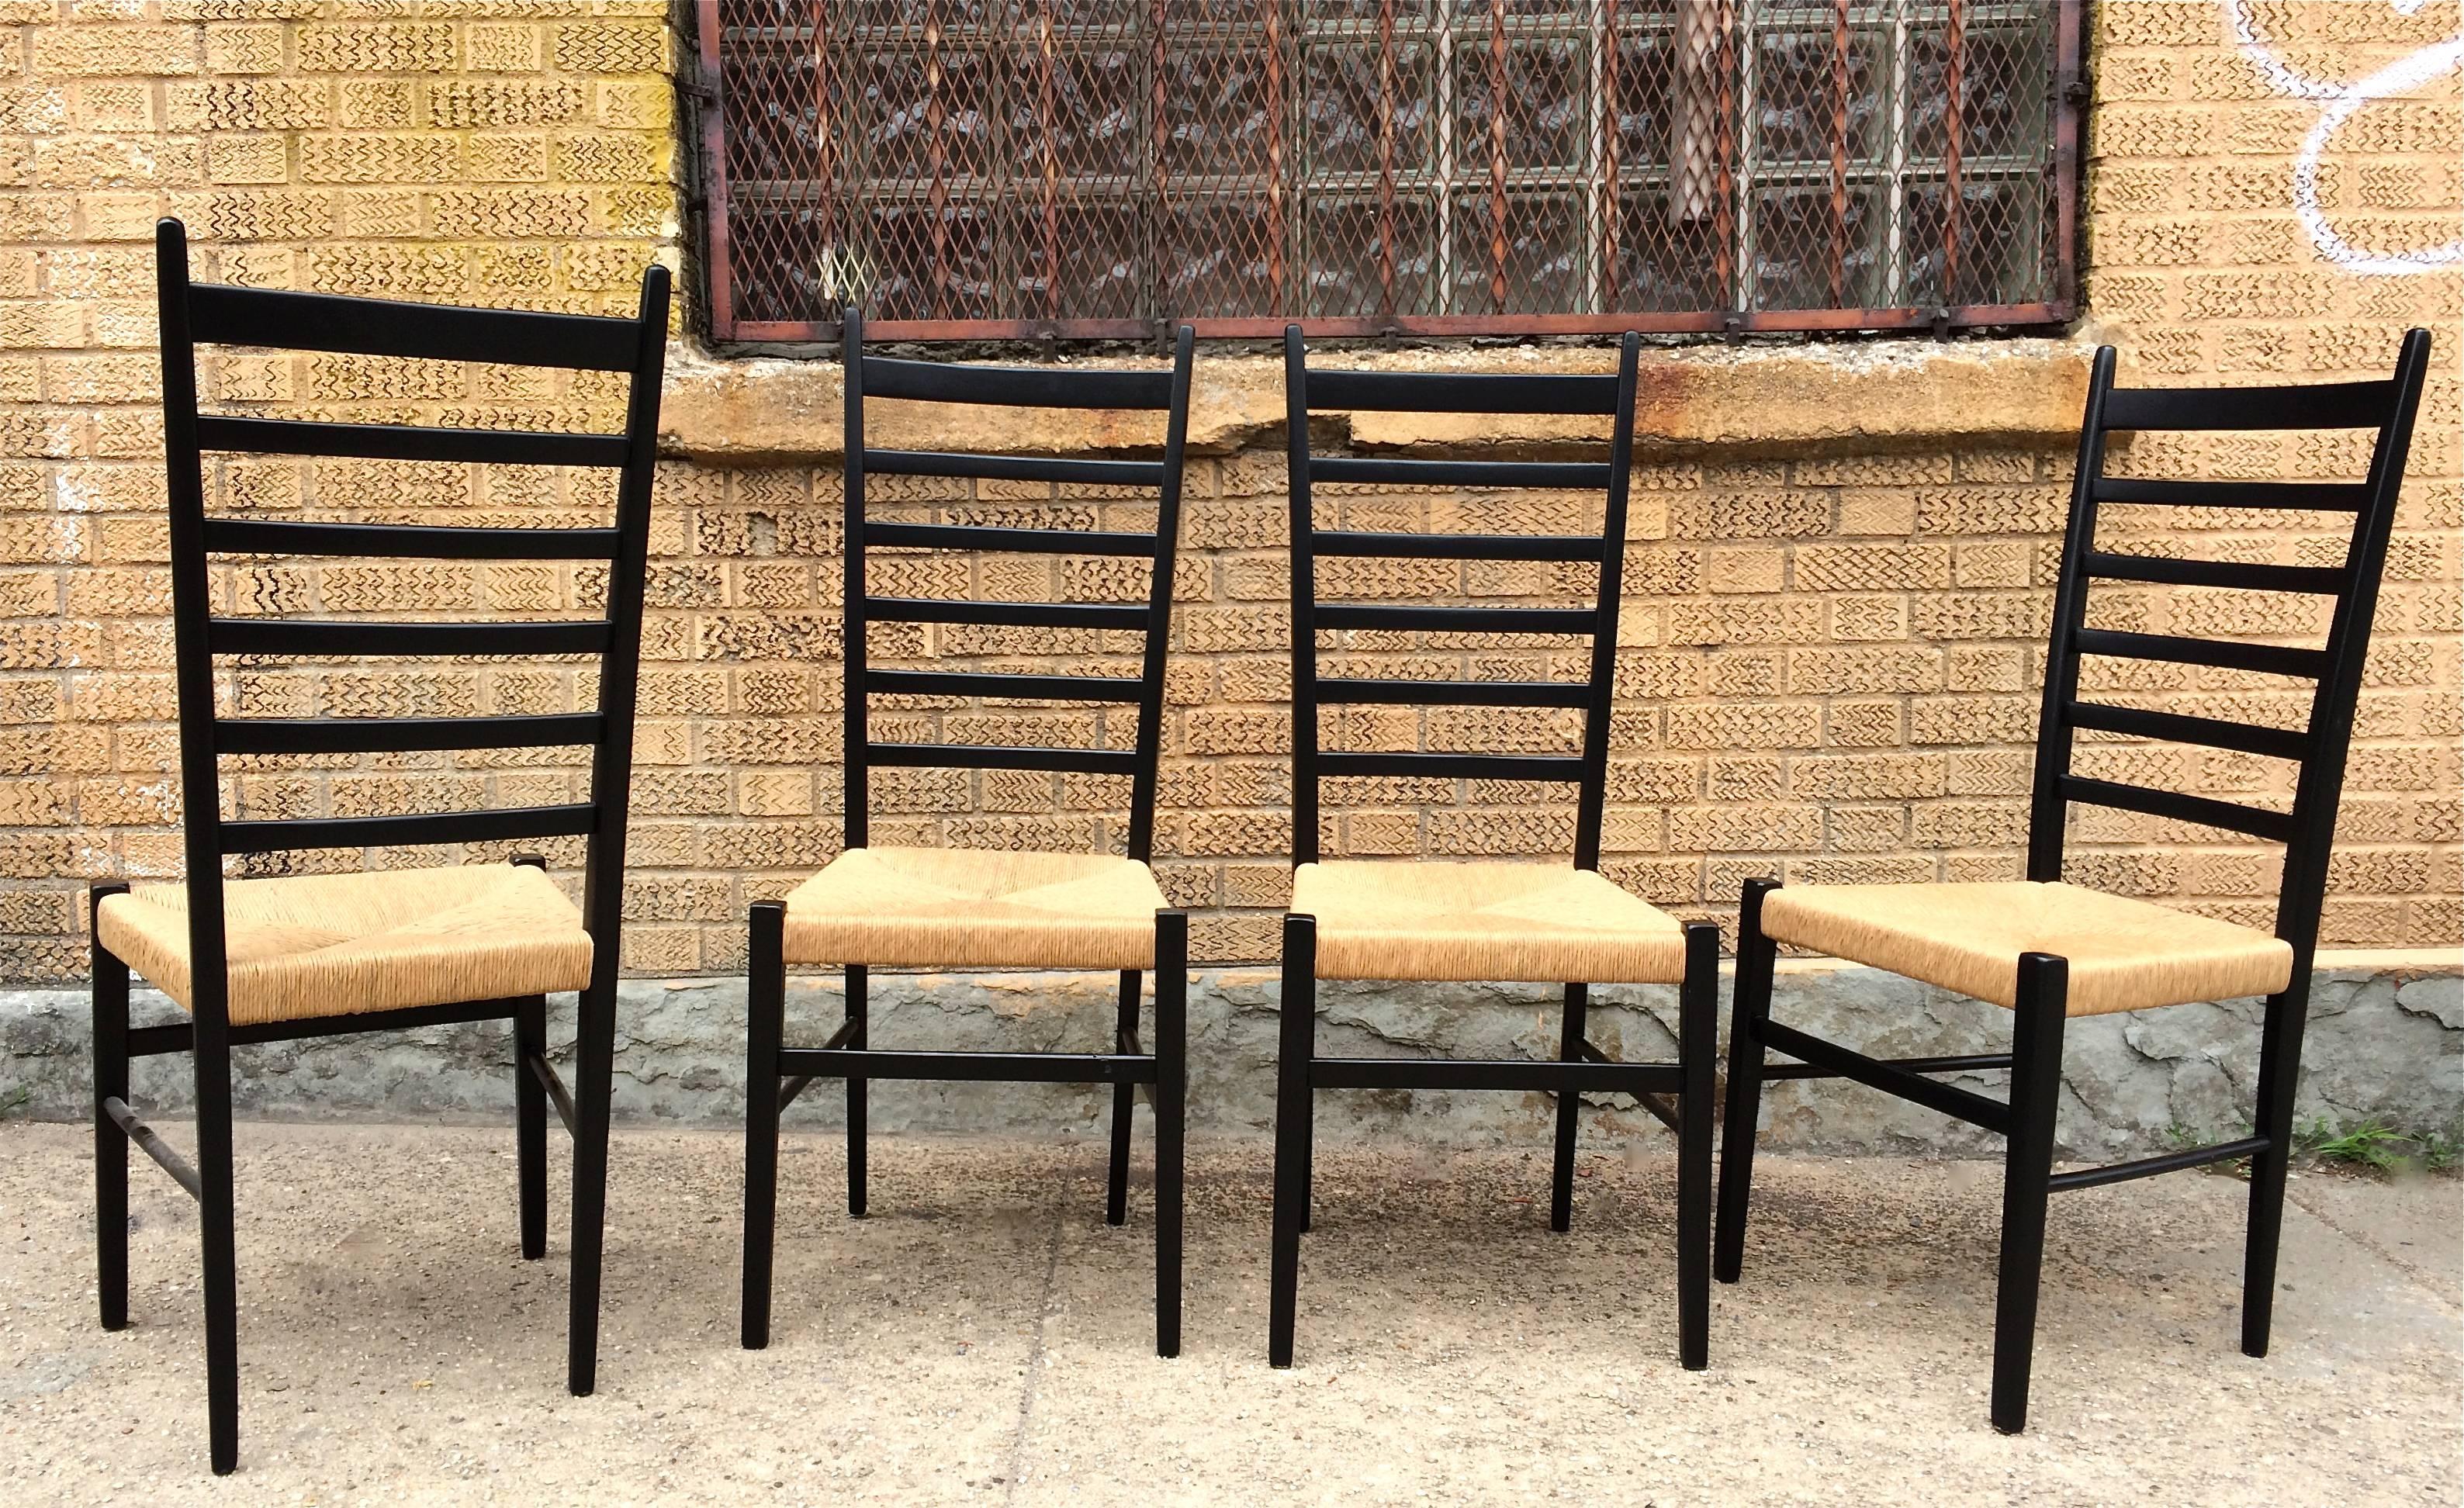 Set of four, lacquered maple, high ladder back chairs with woven rush seats attributed to Gio Ponti, marked made in Italy.